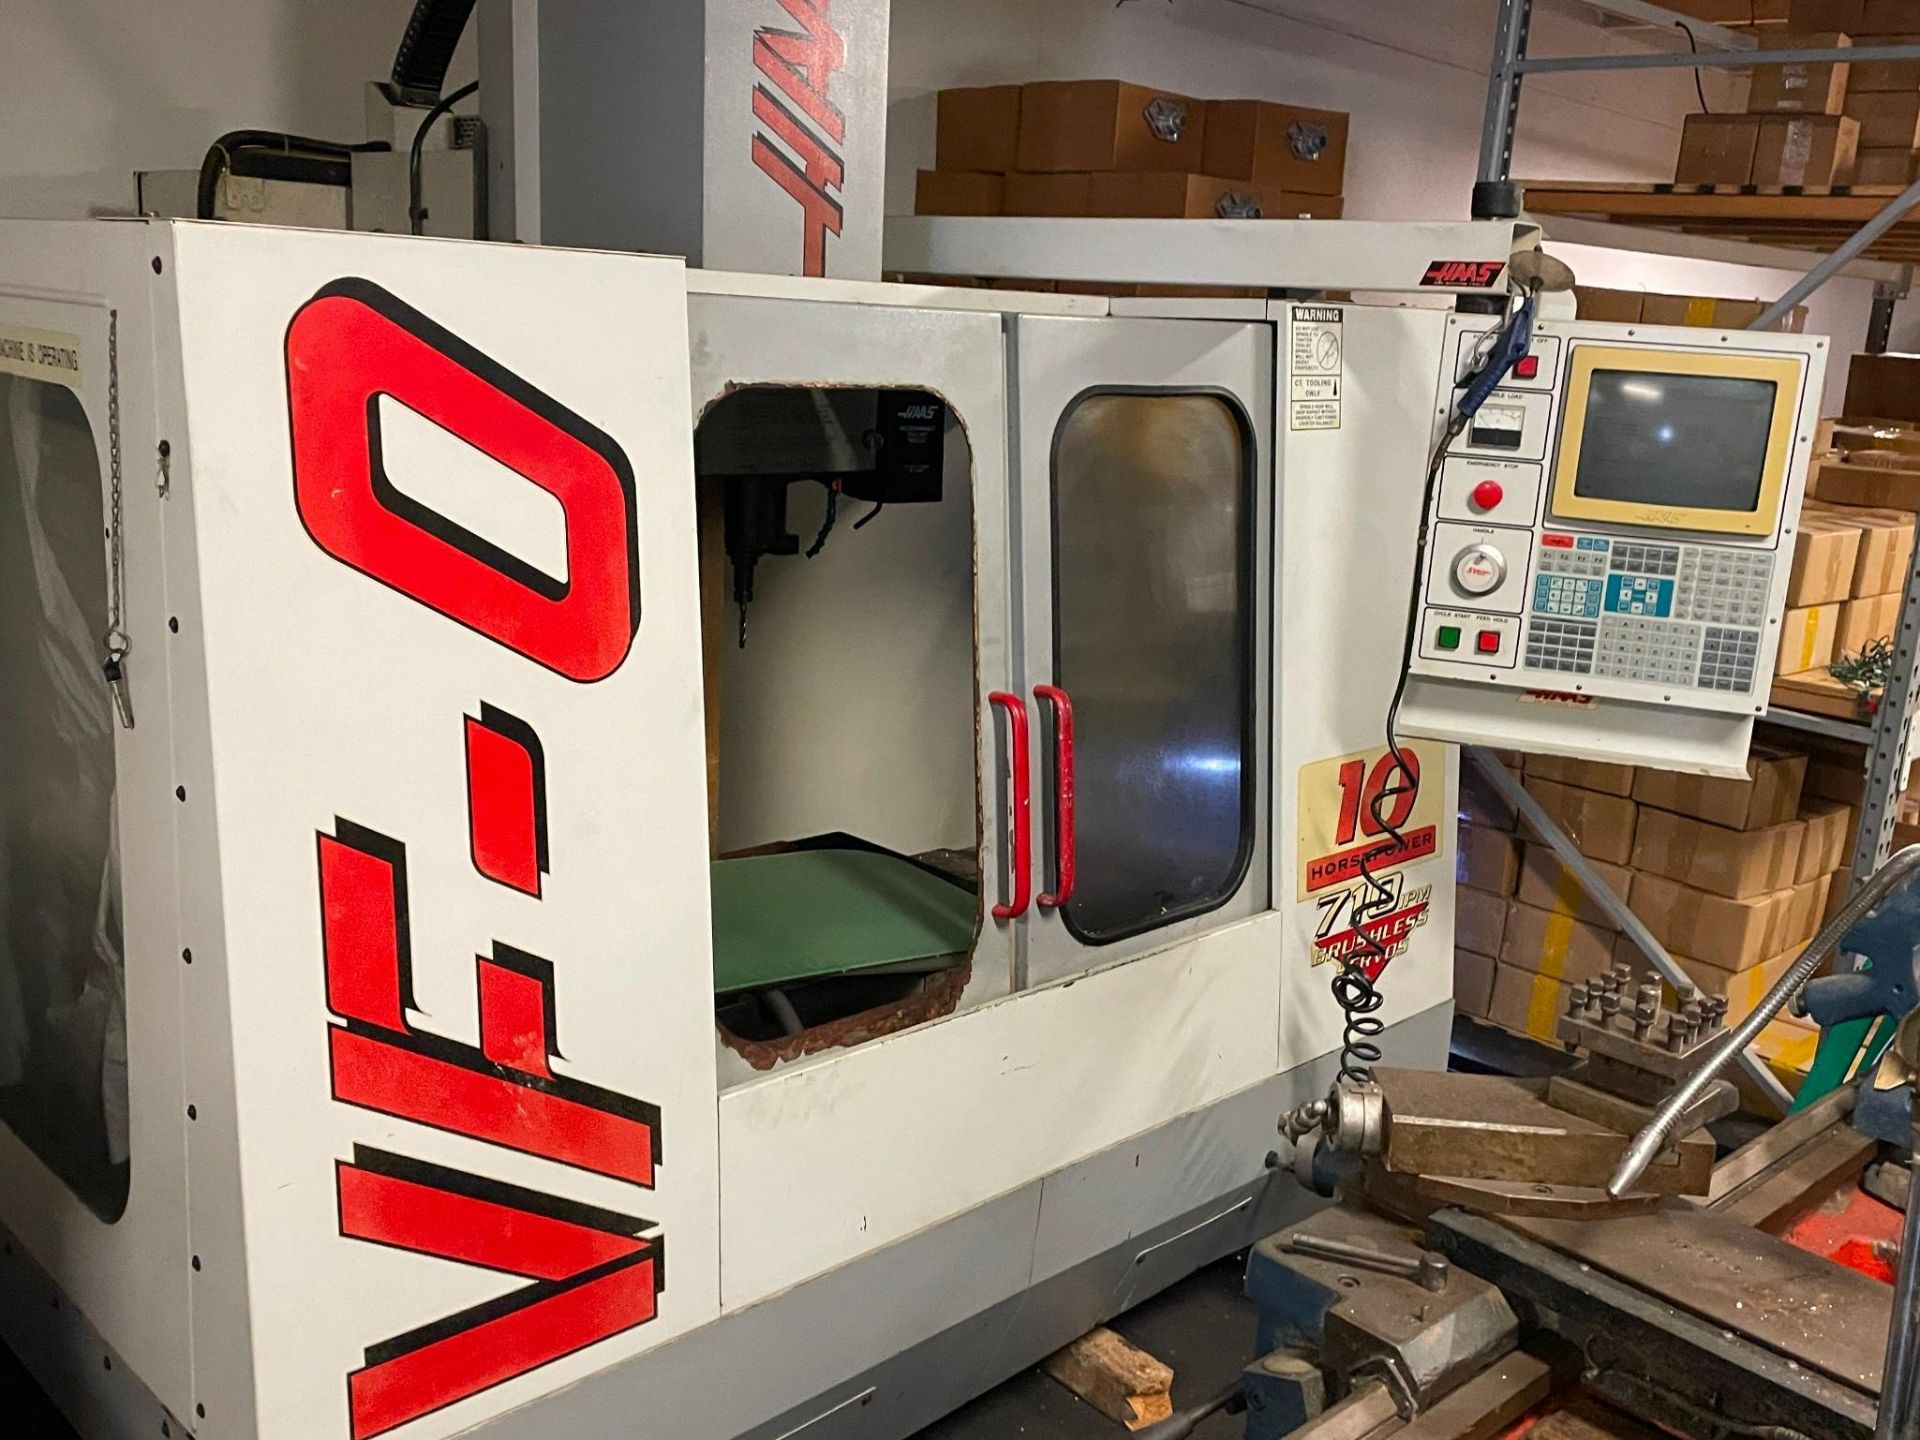 HAAS VF-0 VERTICAL MACHINING CENTER, YEAR 1996 - USED